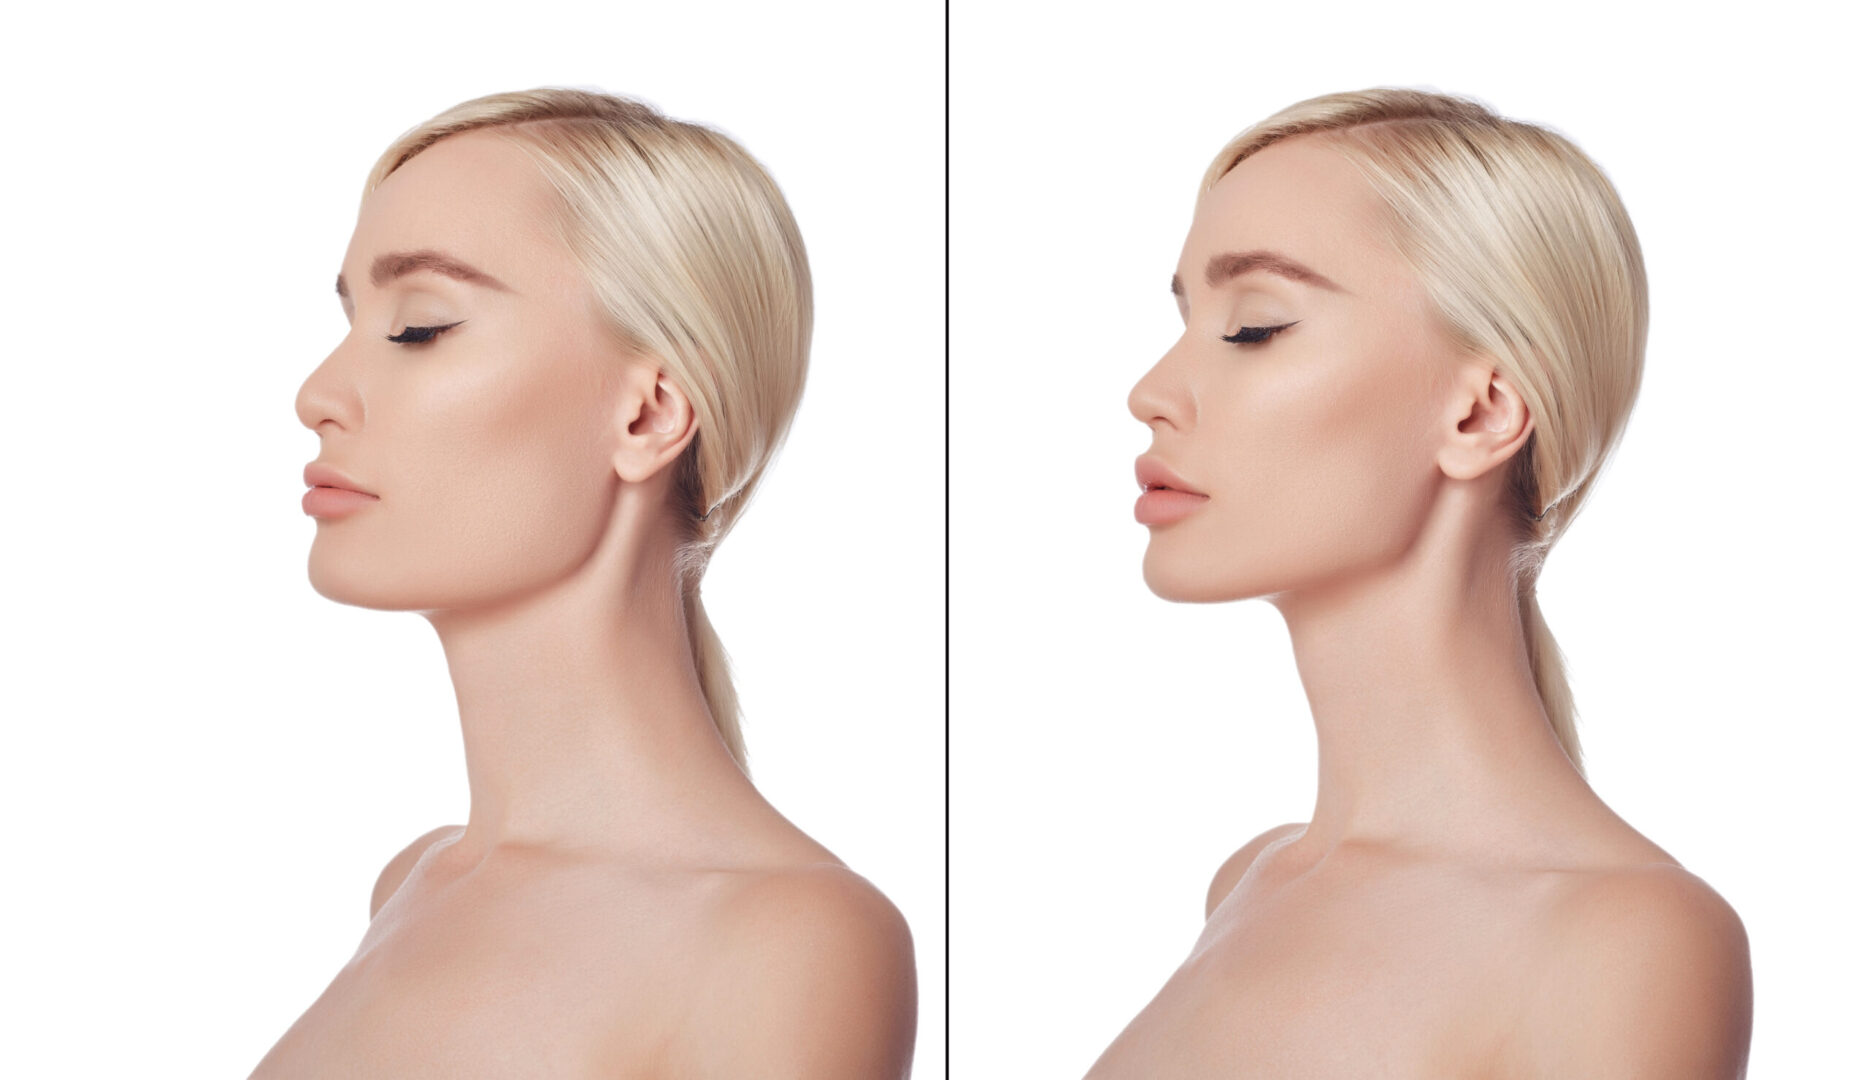 chin augmentation procedure provided by Aspire Surgical in the Salt Lake City, UT areaPortrait beautiful young woman after plastic surgery